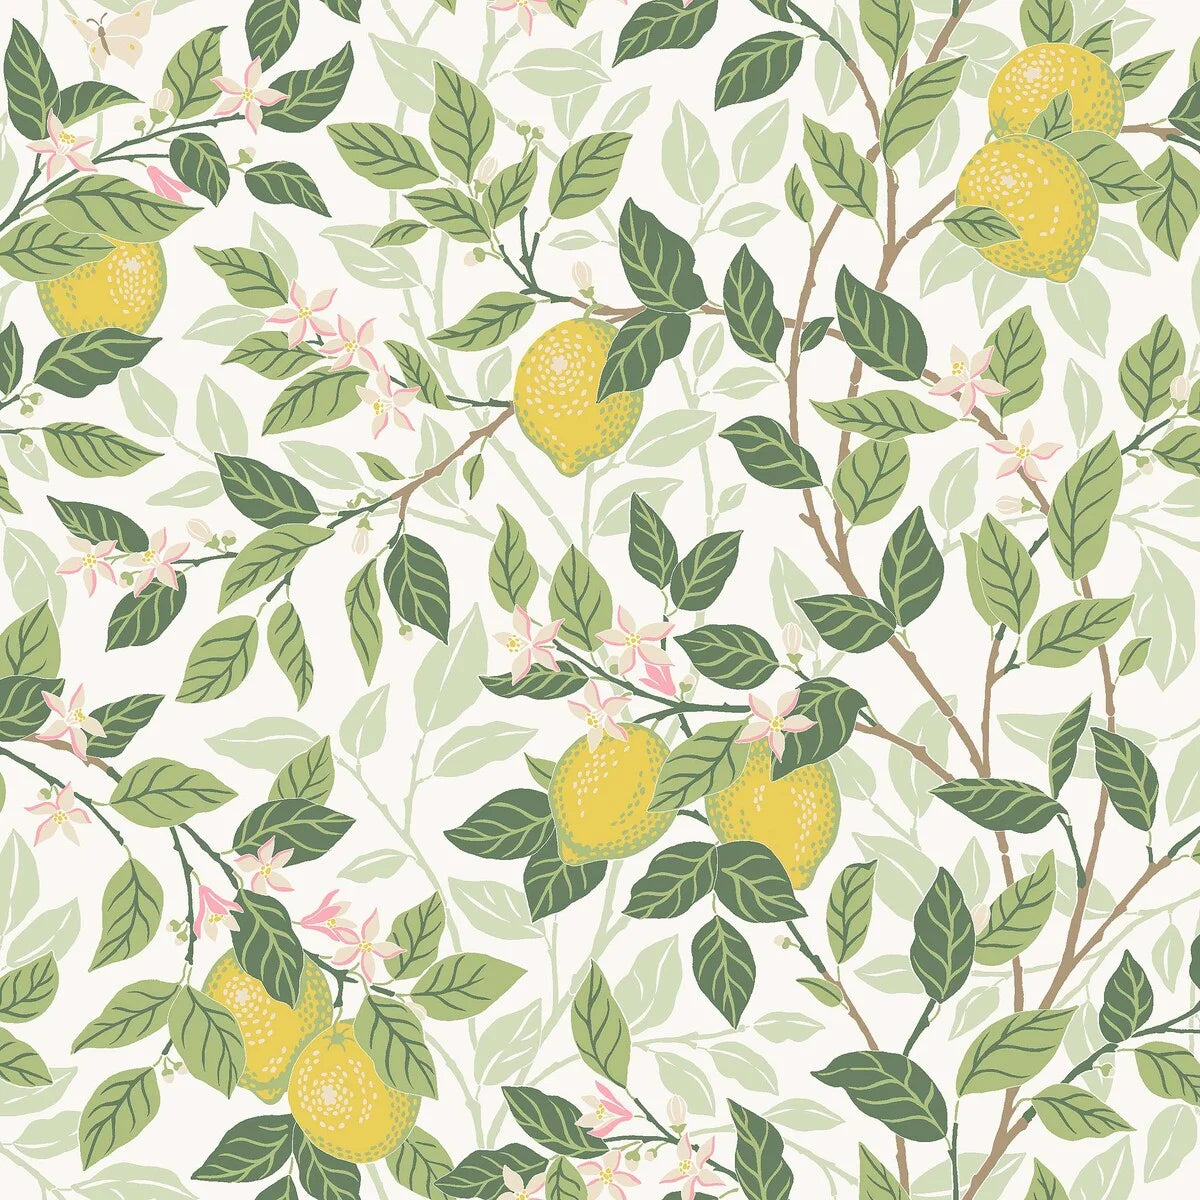 Experience the calm yet lively charm of our Citronträd wallpaper in a light palette of white, green, beige, pink and yellow tones. 